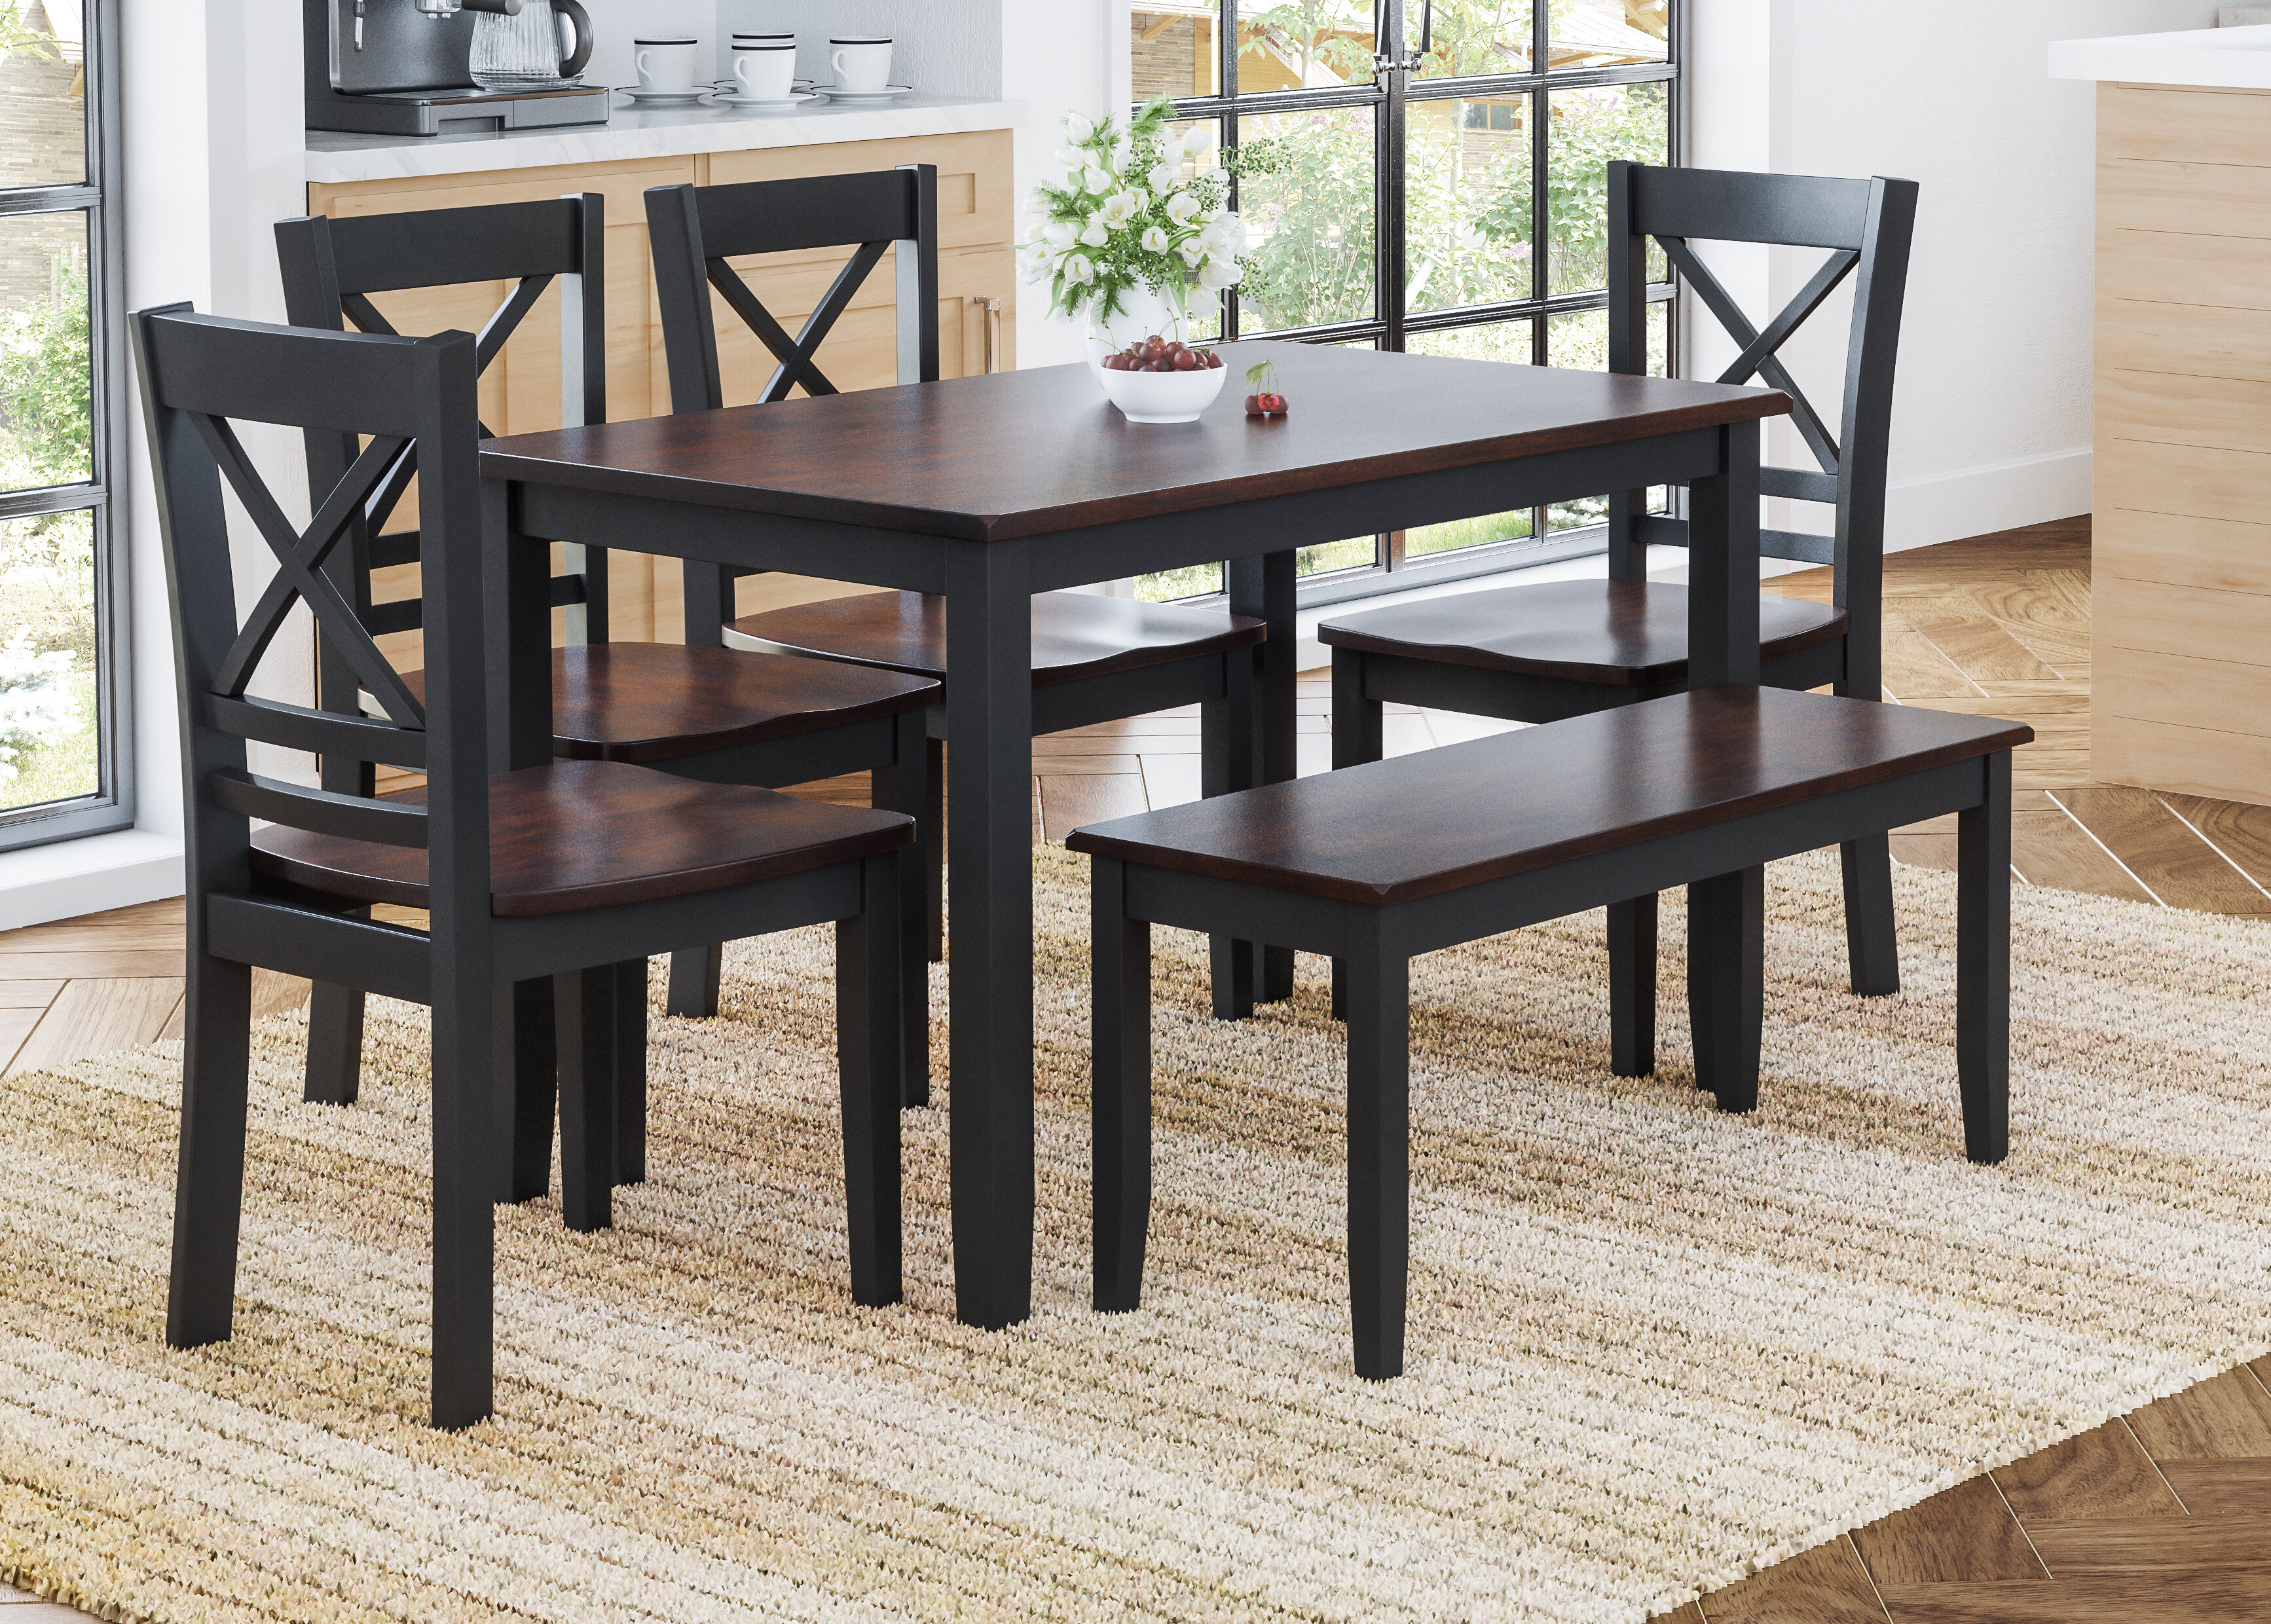 Gorge Dining Set With 6 Chairs Best Sale, 55% OFF | www.bculinarylab.com